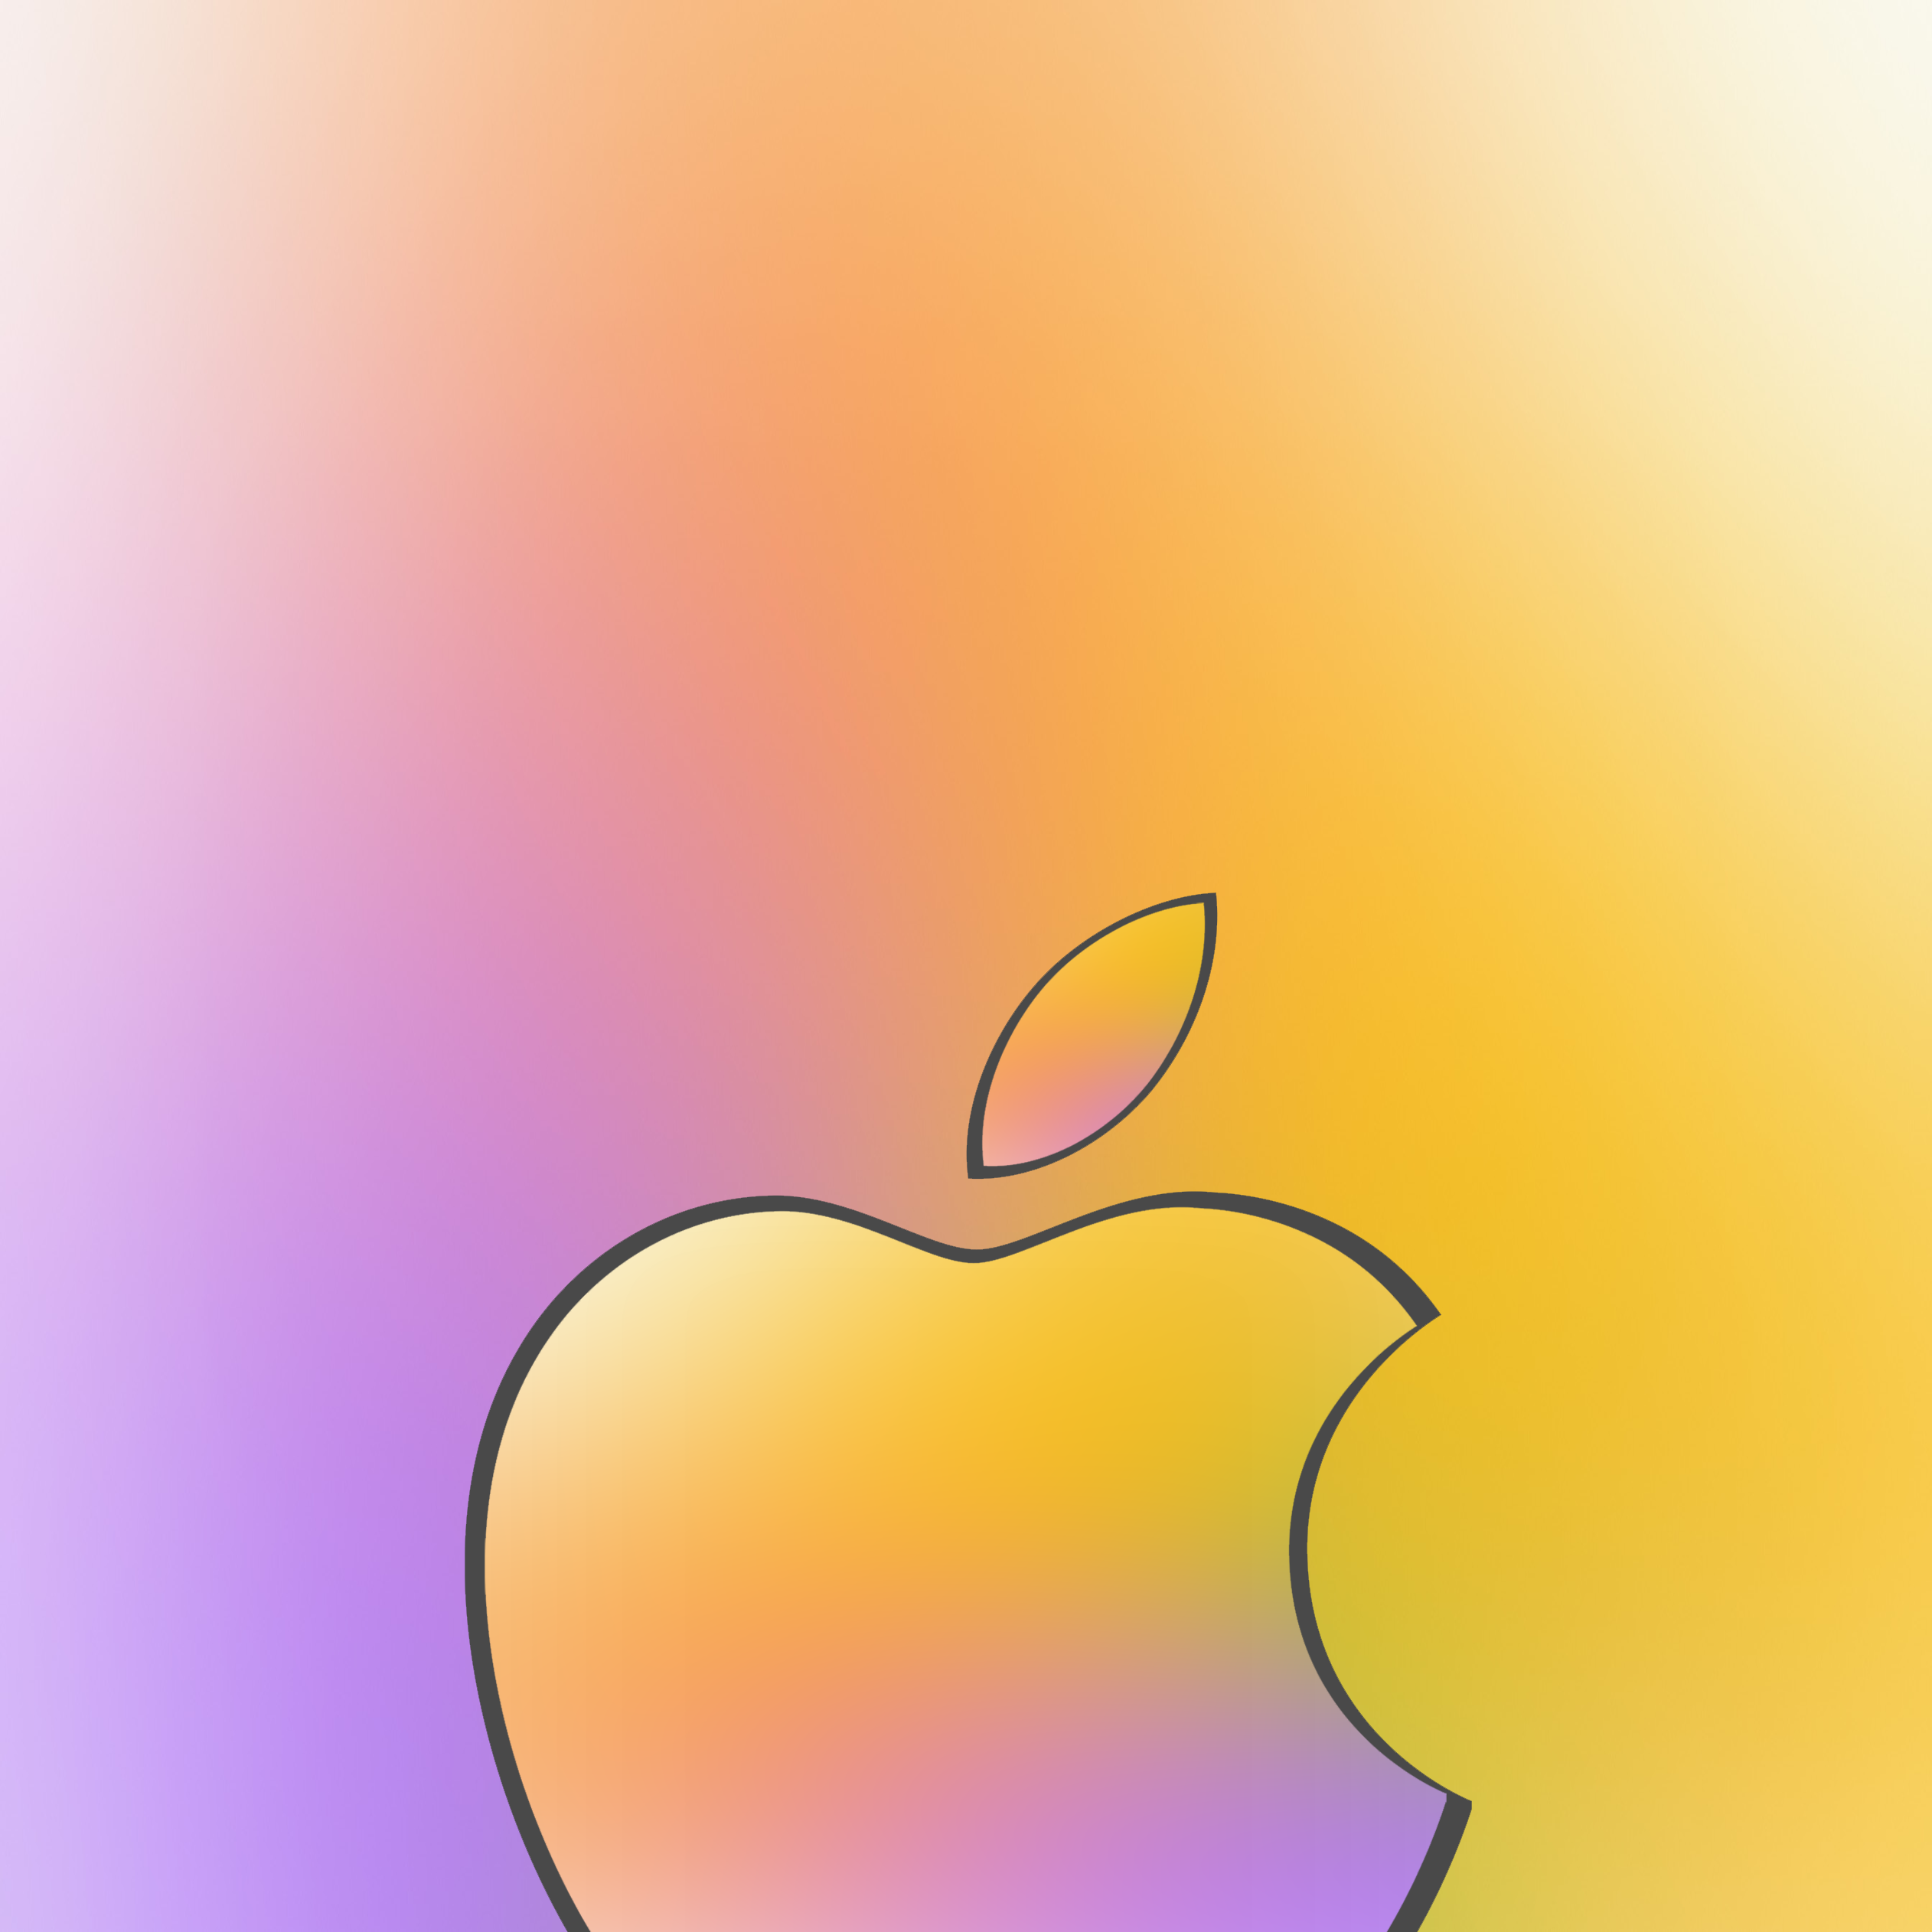 Apple Card wallpapers for iPhone, iPad, and desktop